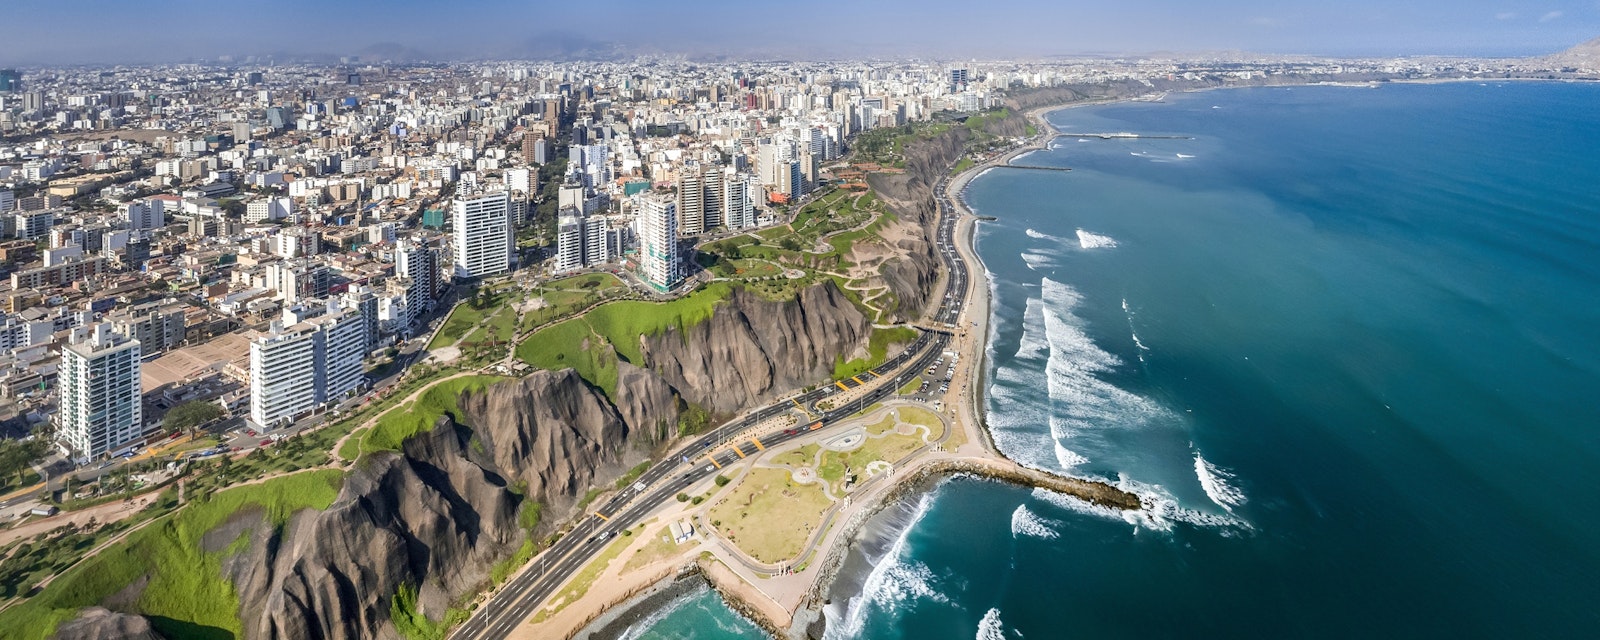 Lima,,Peru:,Aerial,View,Of,Miraflores,Town,,Cliff,And,The